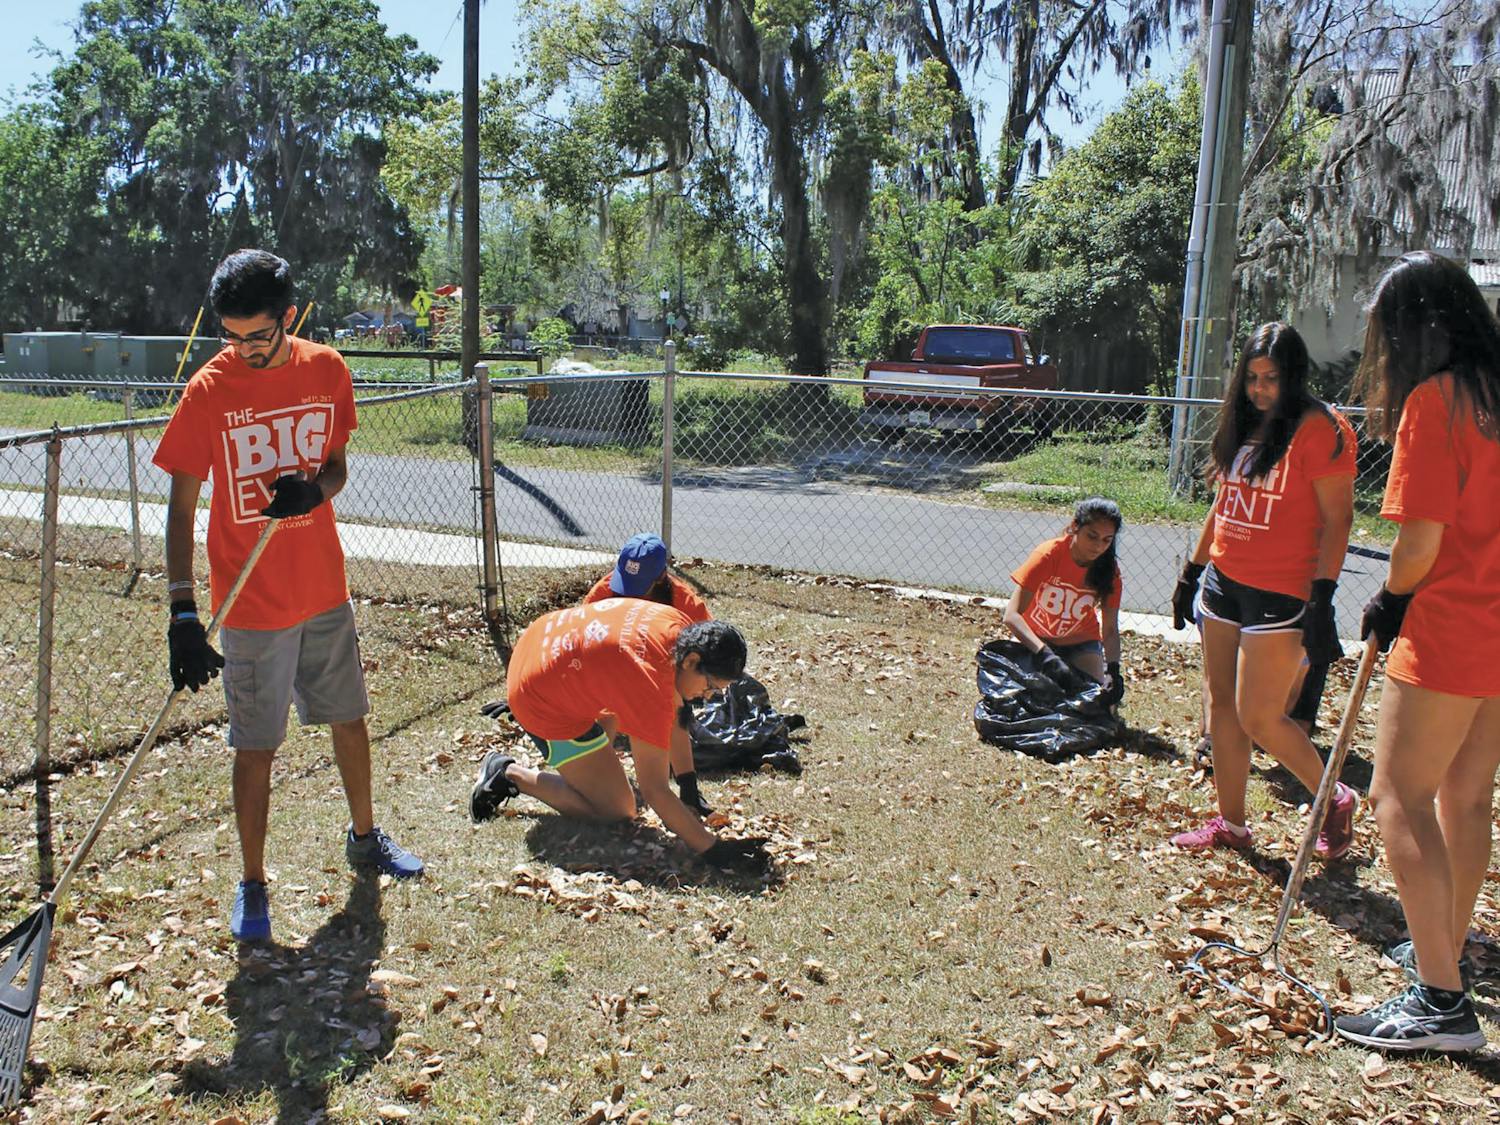 Amol Patadia, a 20-year-old UF biomedical engineering sophomore, rakes fallen leaves behind the home of a visually impaired woman in Gainesville’s Porters Community on Saturday as a part of The Big Event, a daylong service event organized by UF Student Government. About 760 students participated at about 45 locations across Gainesville. 